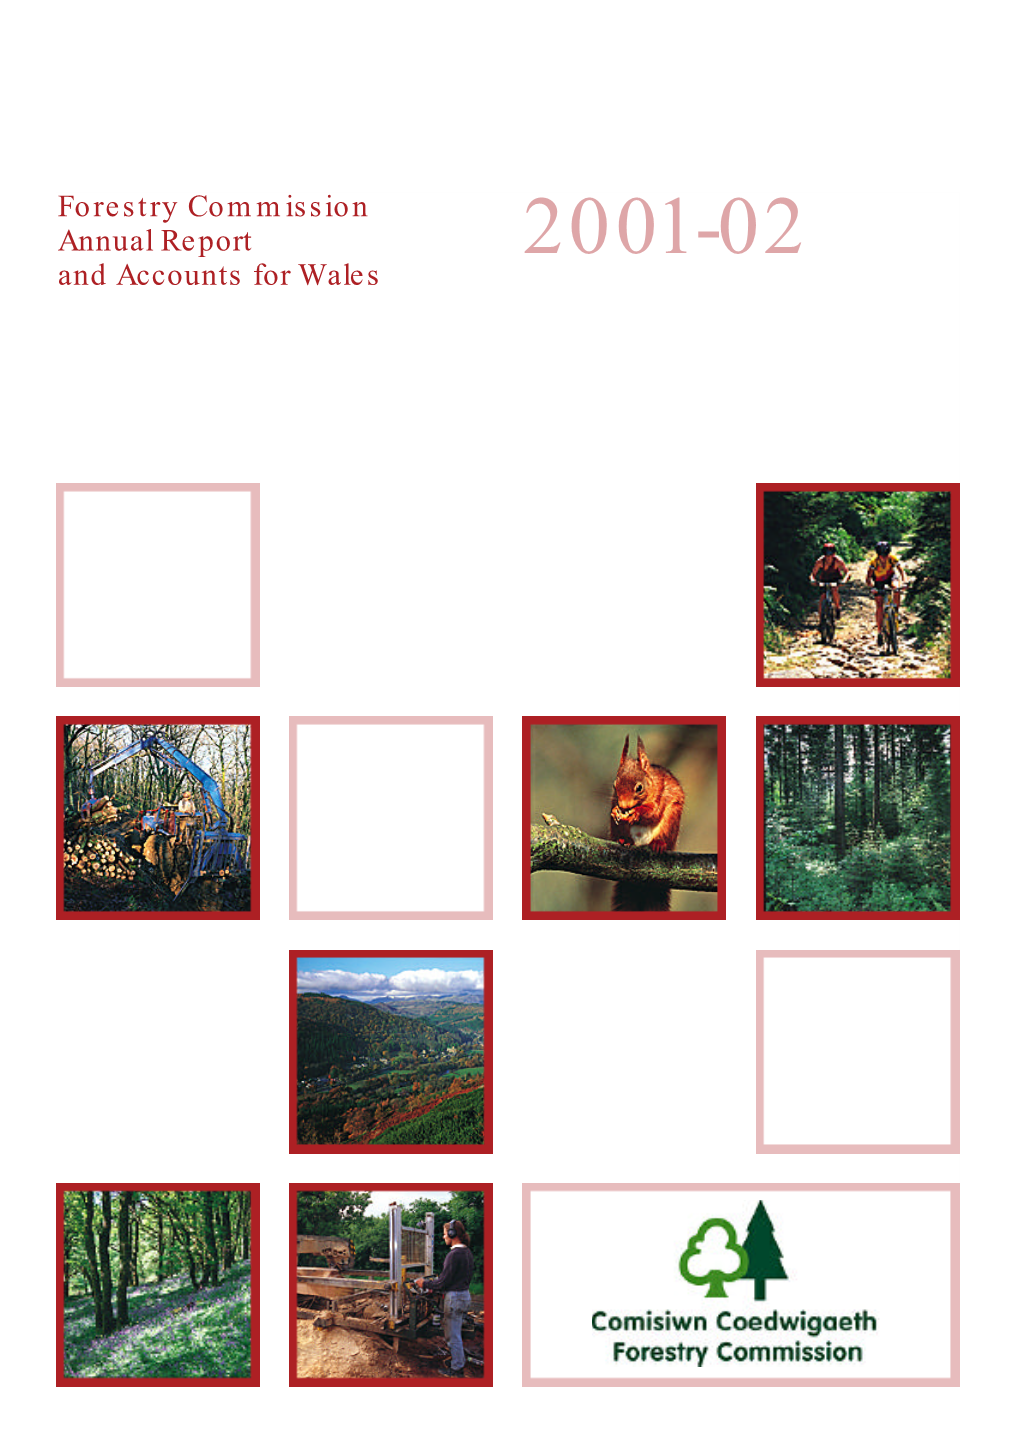 Forestry Commission Annual Report and Accounts for Wales with the Net Funding and Net Worth of FE Buildings - 20 to 60 Years in Wales Reflected in These Accounts